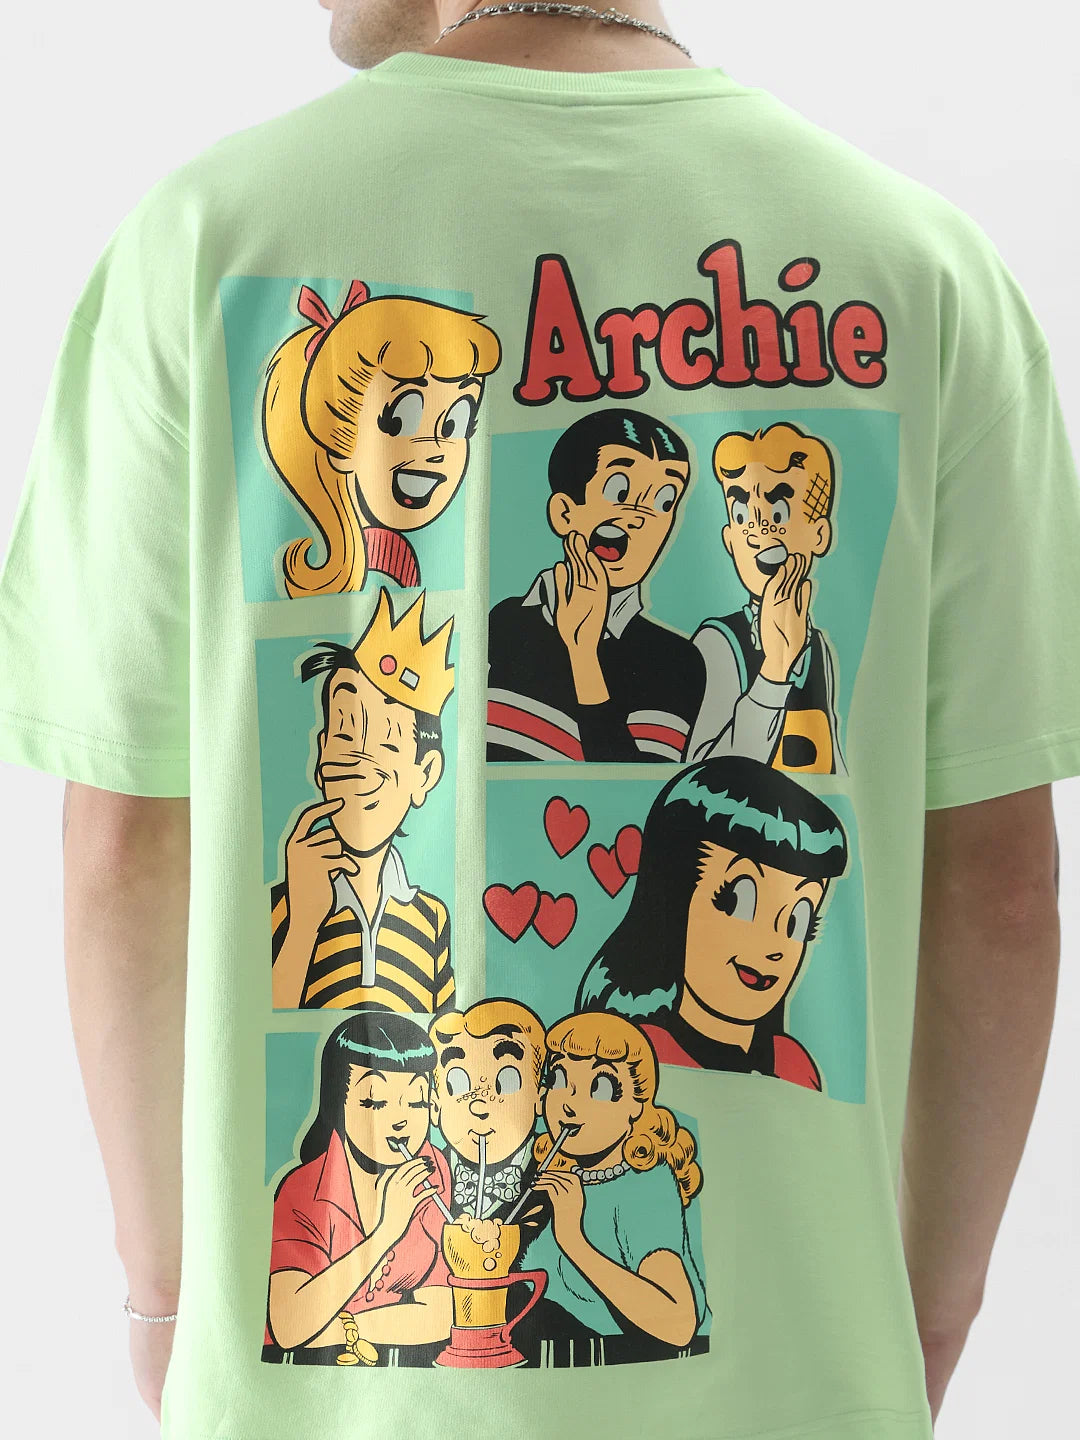 Archie The Gang (UK version)